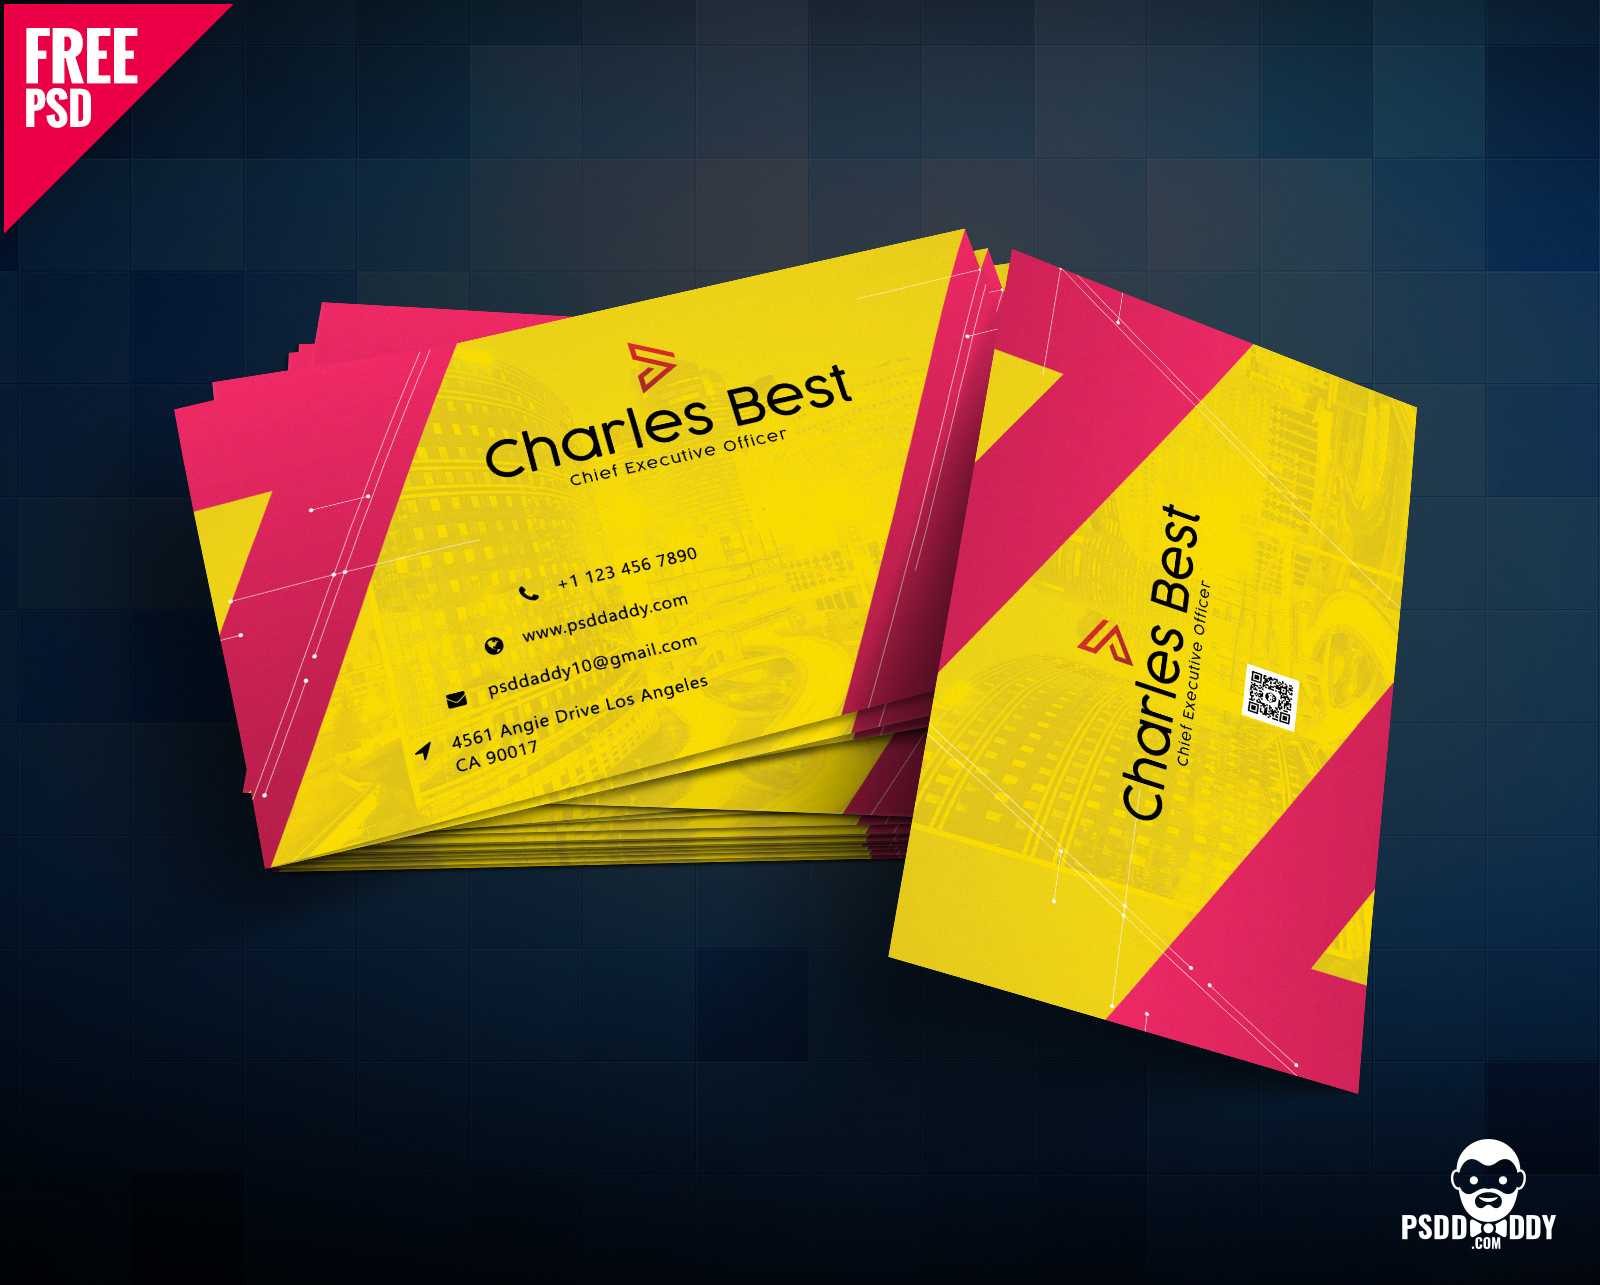 Download] Creative Business Card Free Psd | Psddaddy Regarding Name Card Template Psd Free Download